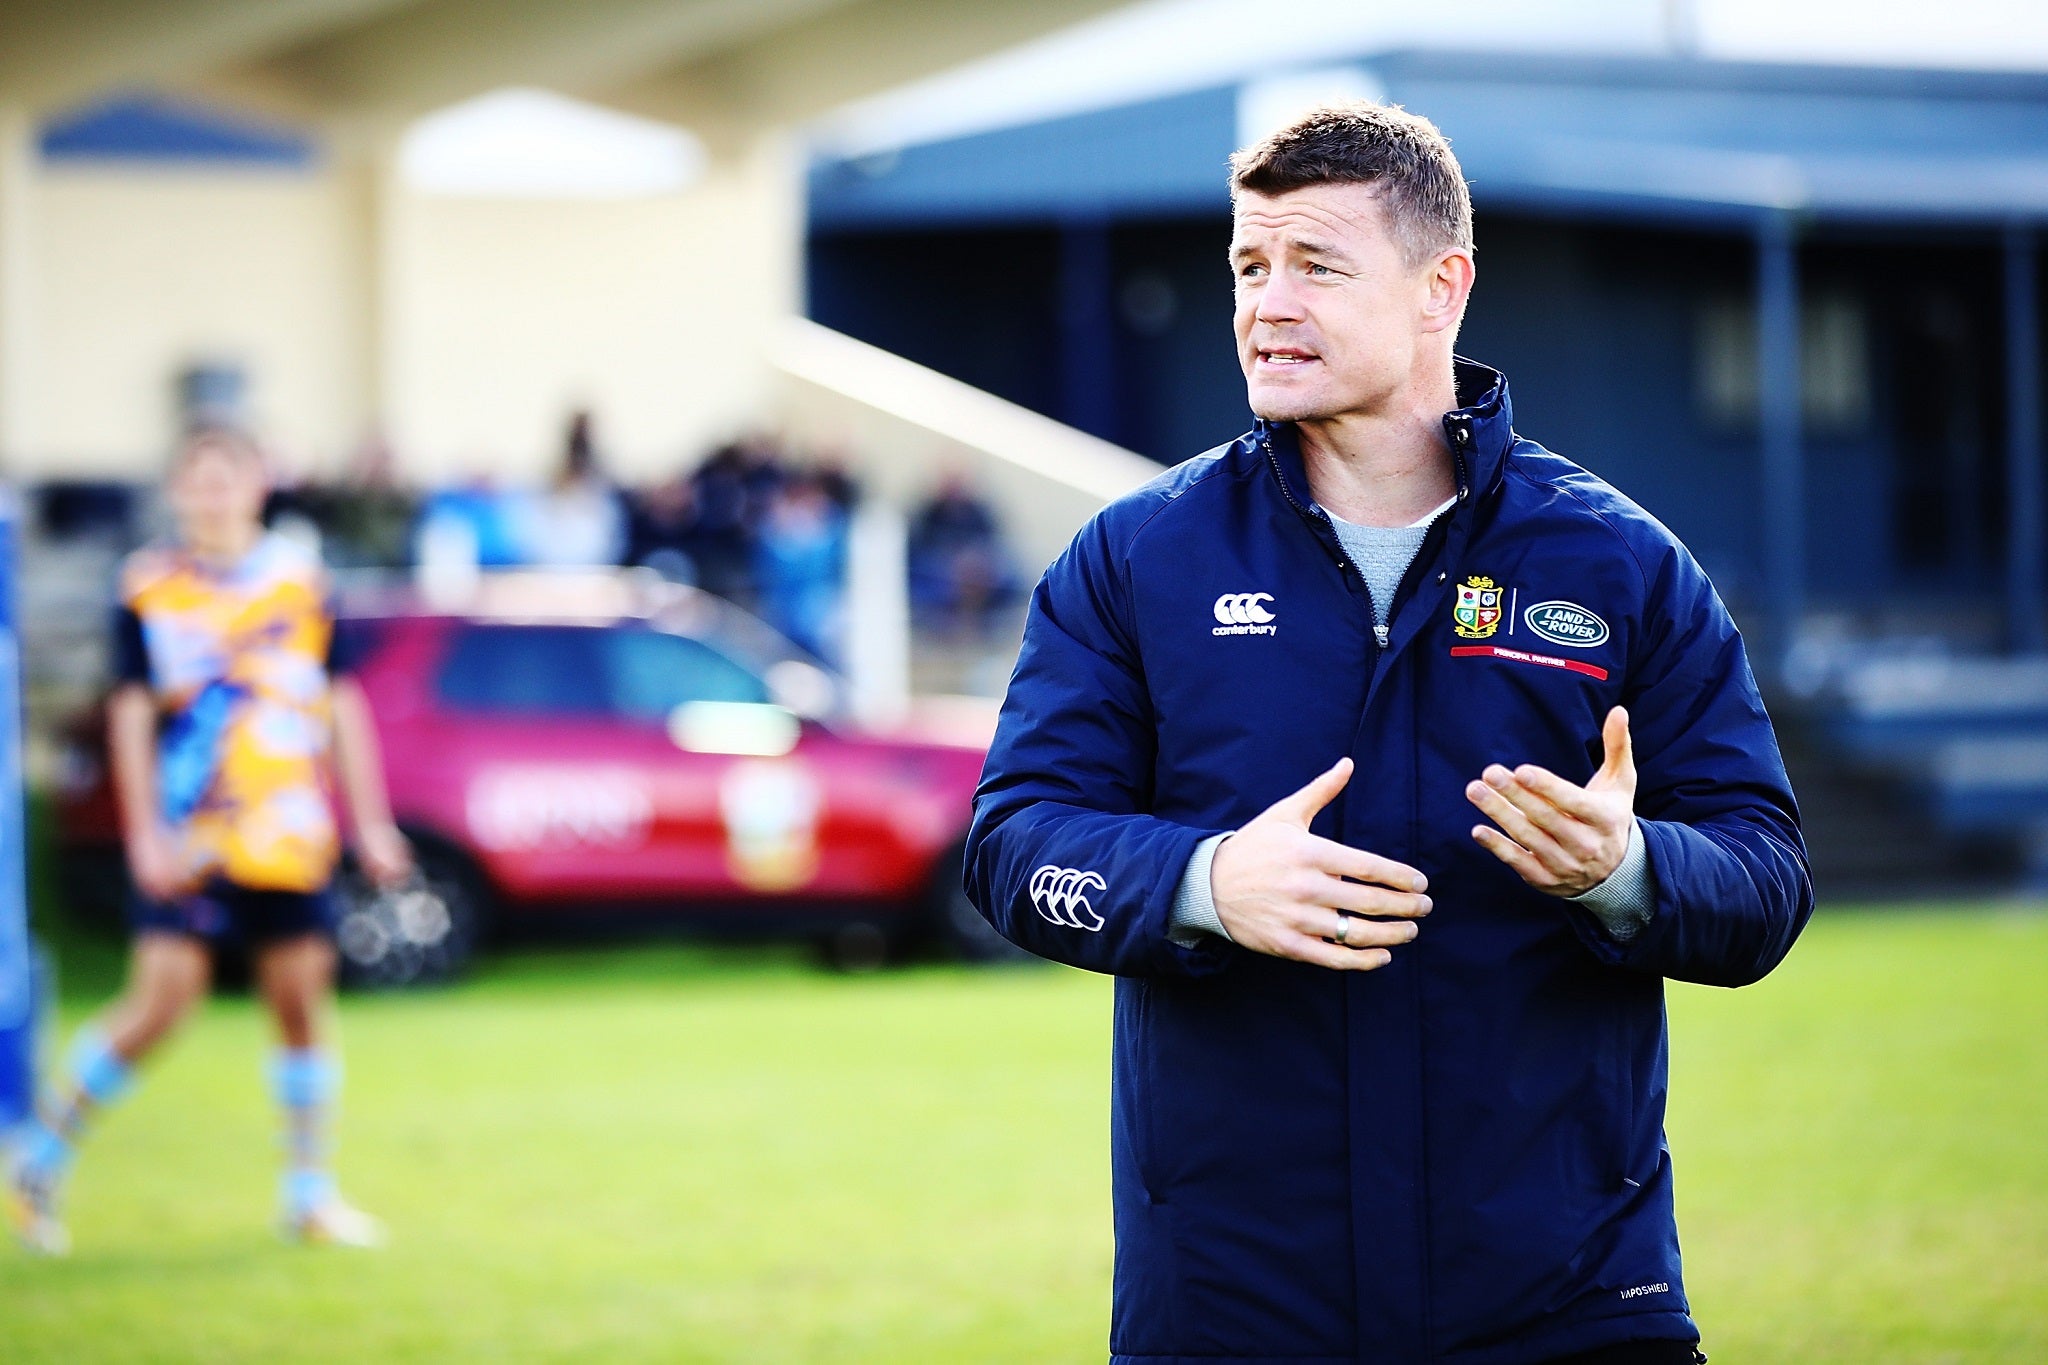 Brian O'Driscoll presented the Lions with their shirts before the first Test